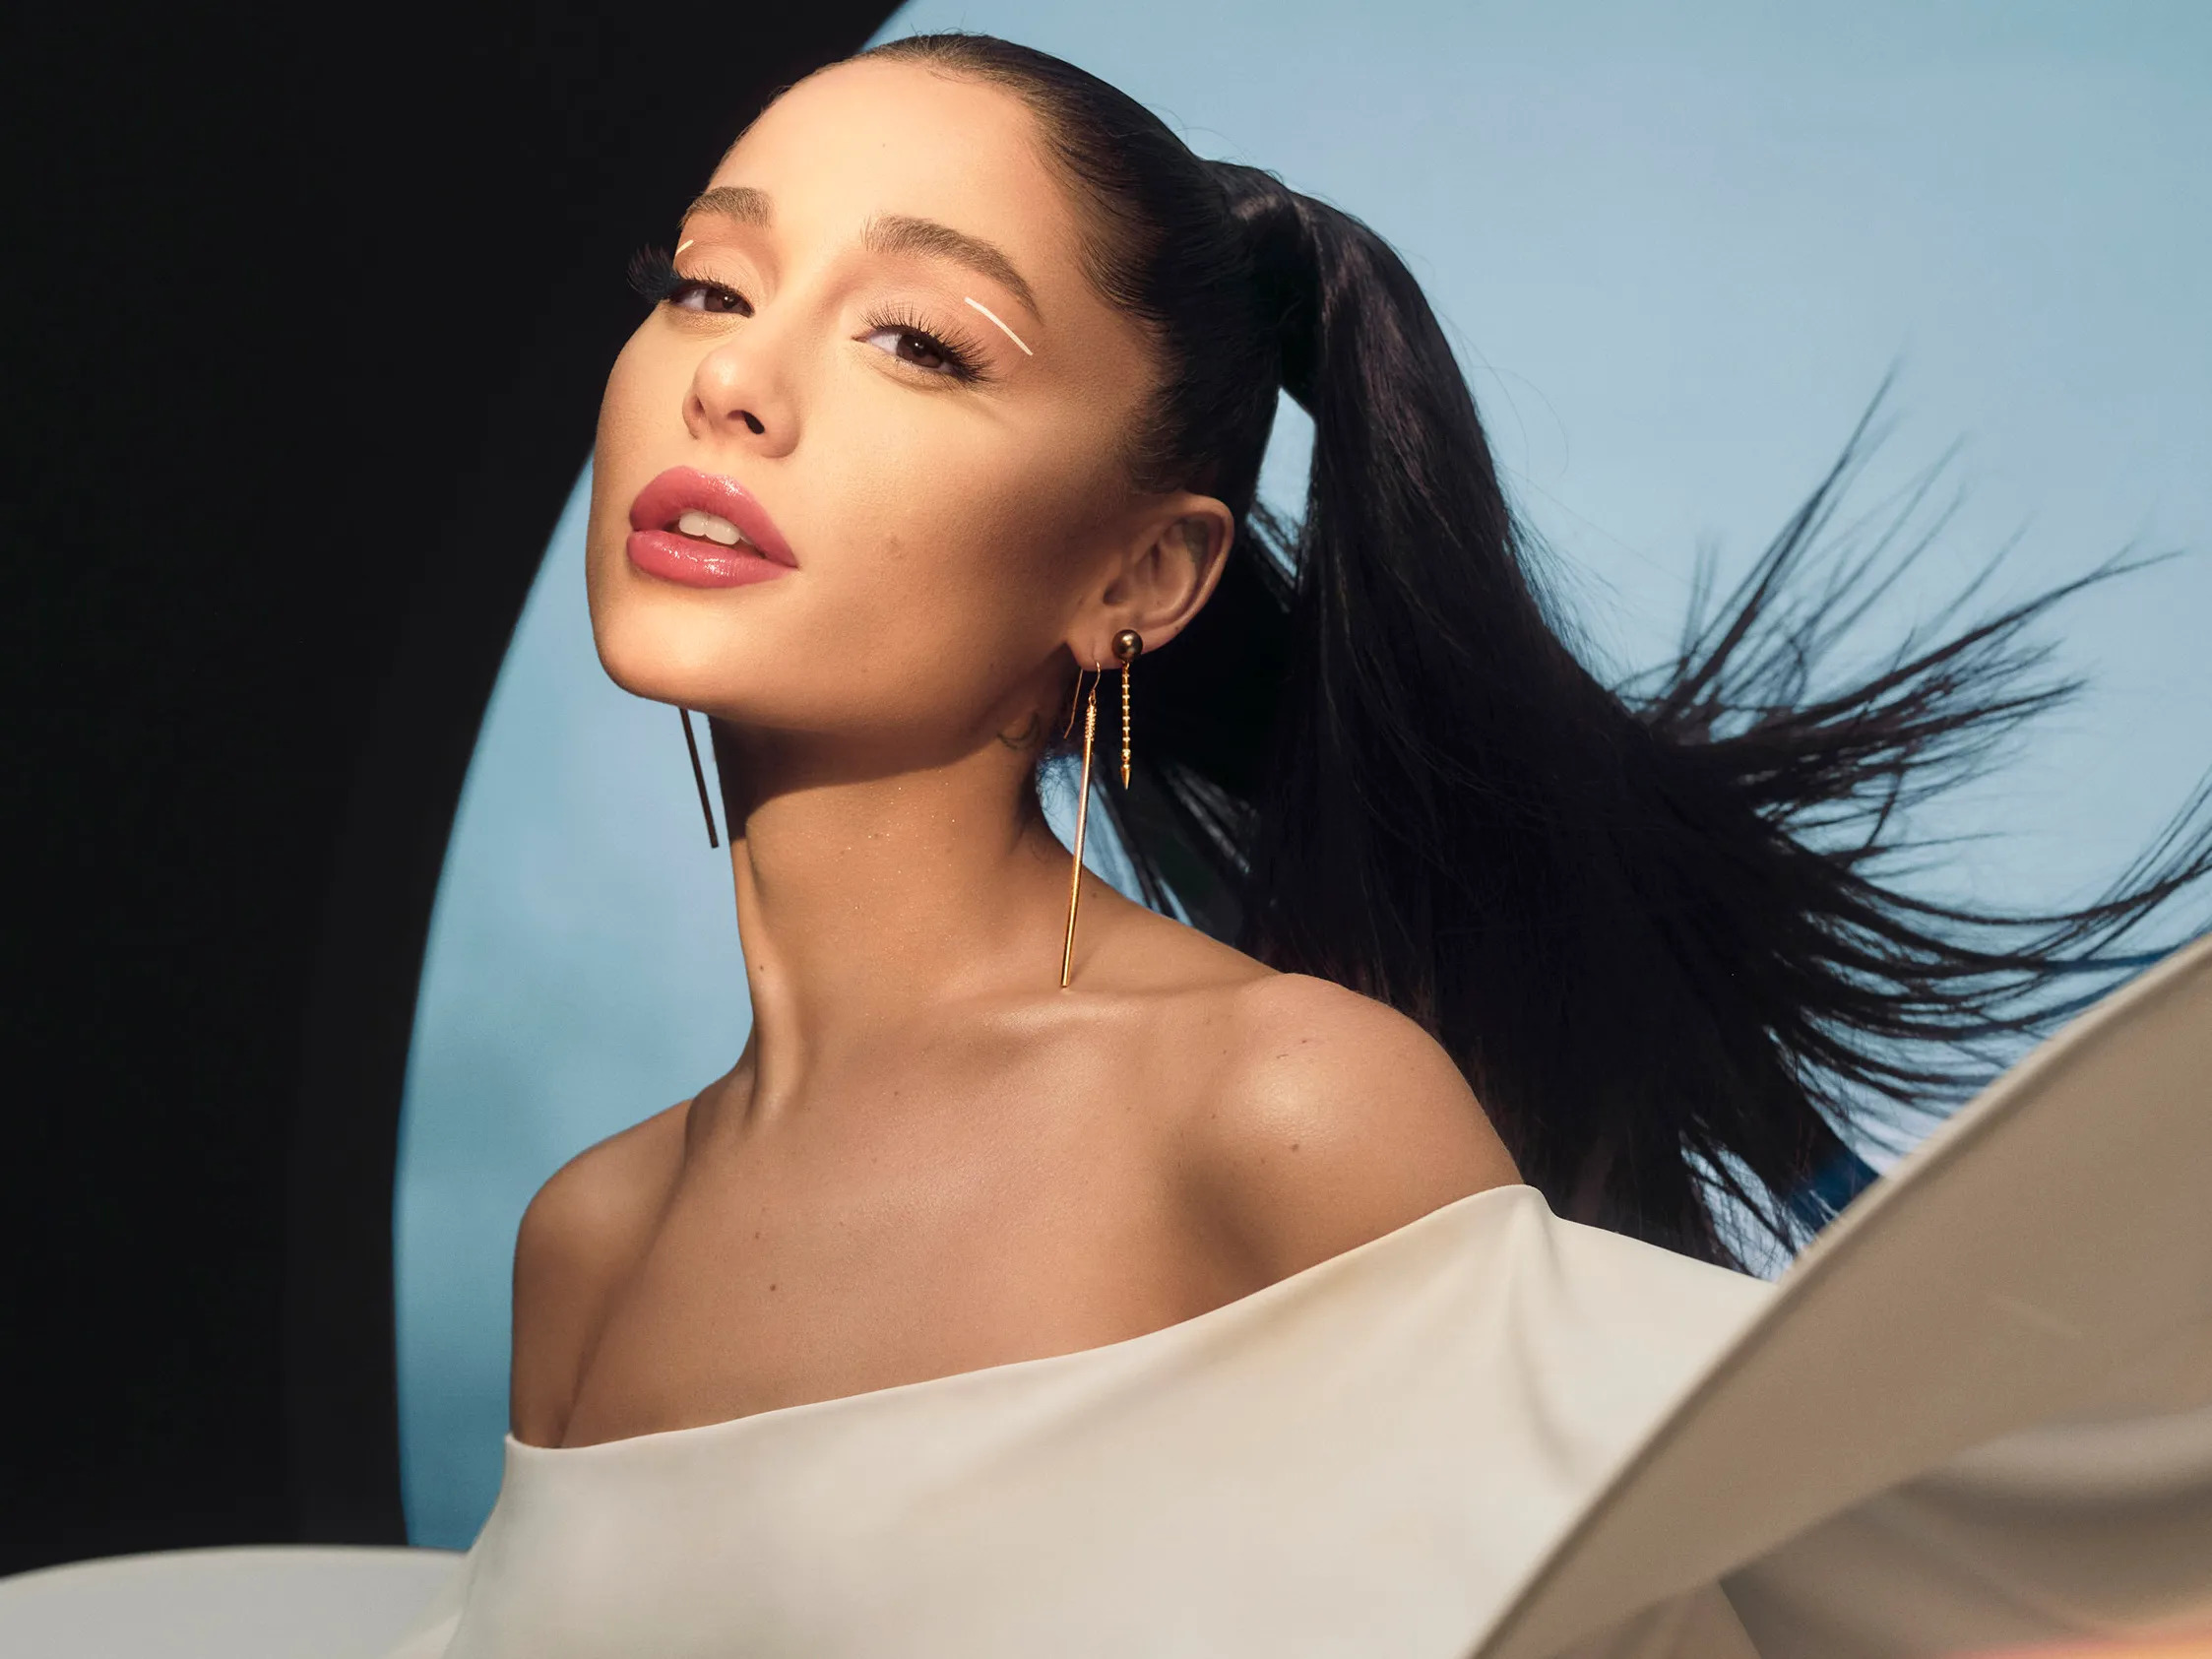 Ariana Grande wearing a white dress on the cover of Allure